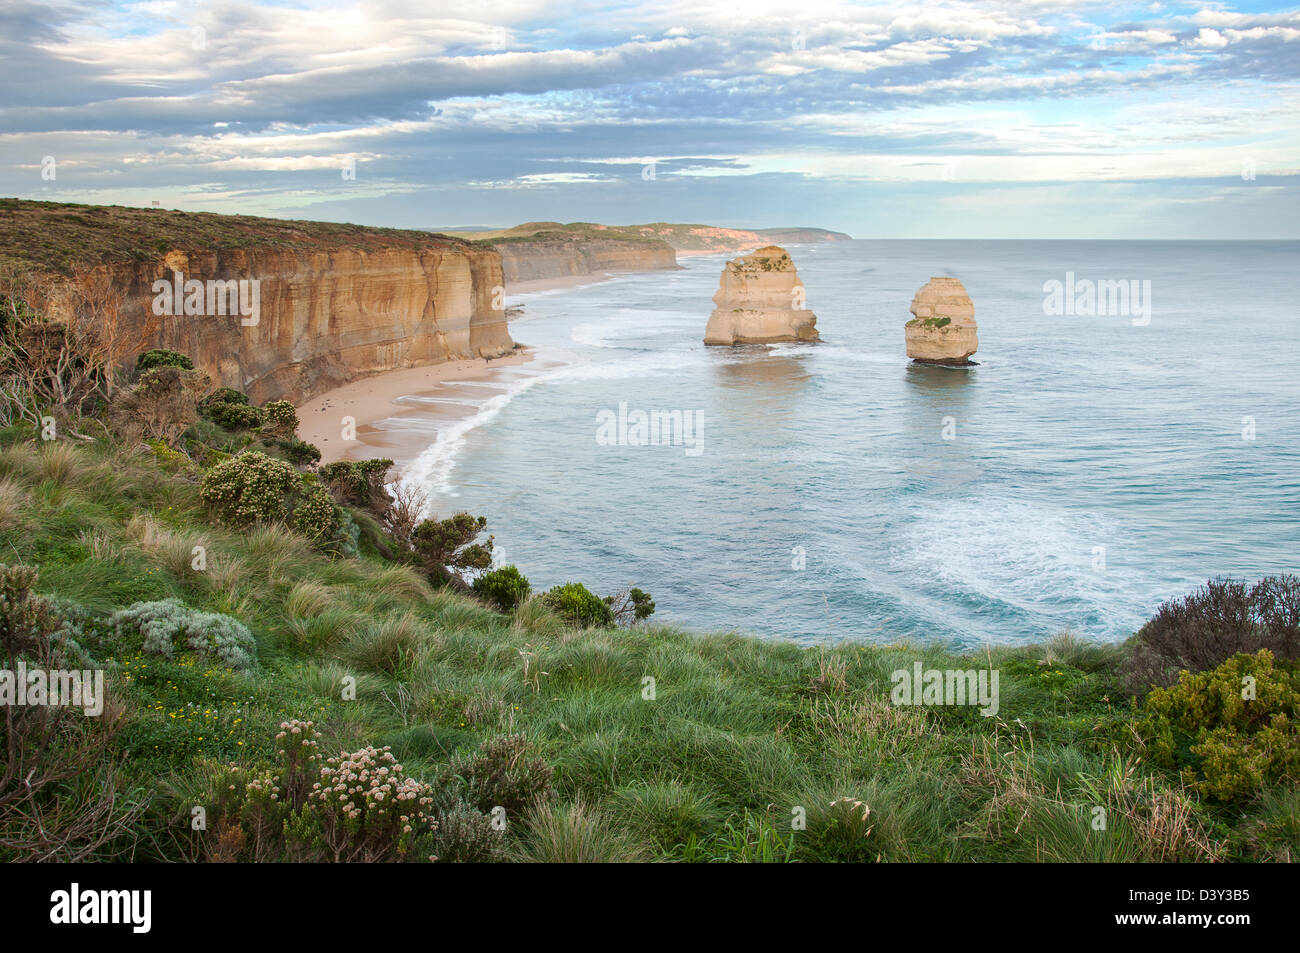 A view of the Twelve Apostles along the Great Ocean Road, Australia Stock Photo